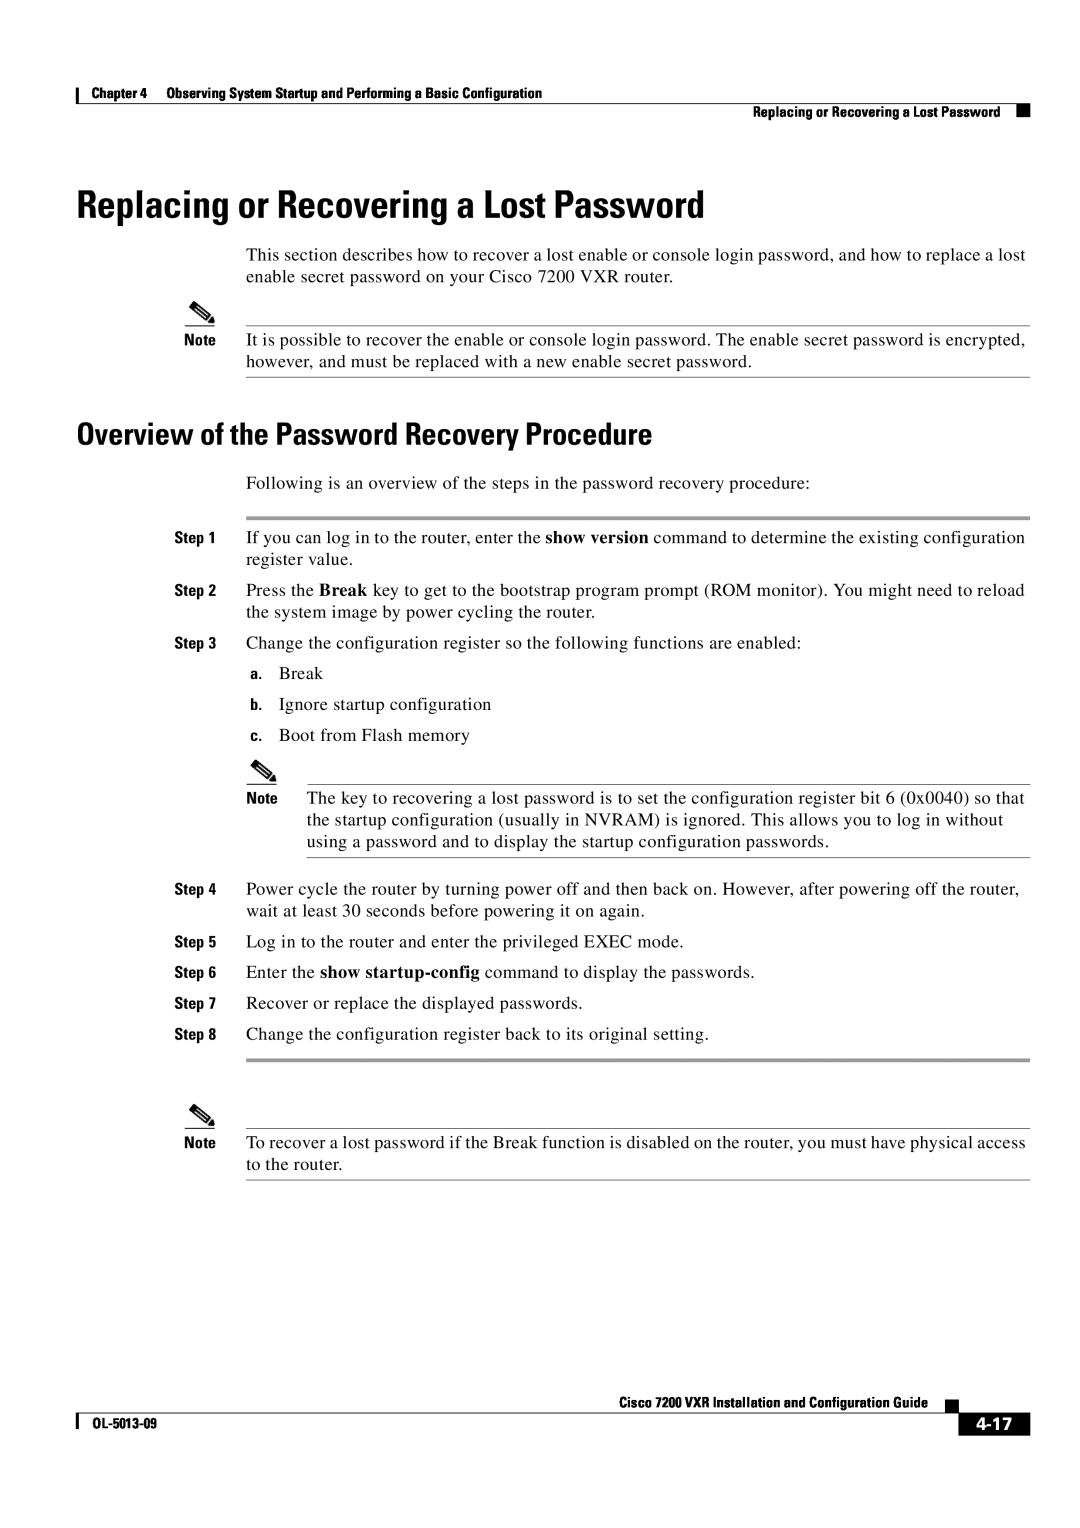 Cisco Systems 7200 VXR manual Replacing or Recovering a Lost Password, Overview of the Password Recovery Procedure, 4-17 